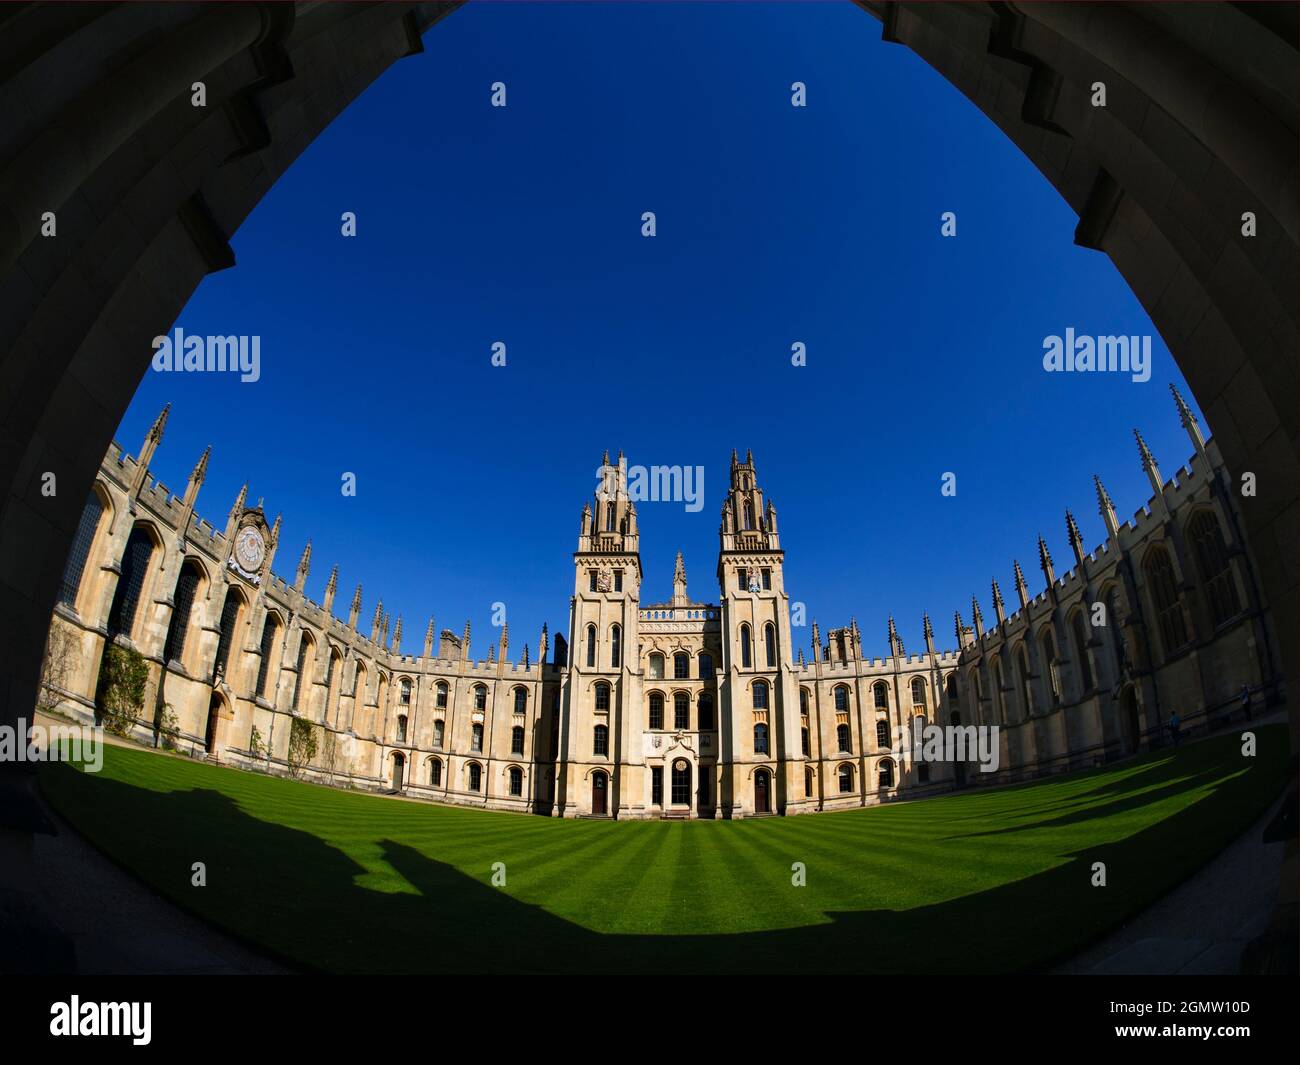 Oxford, England - 15 May 2015; no people in view. All Souls College was founded by Henry VI of England and the Archbishop of Canterbury, in 1438.  Uni Stock Photo